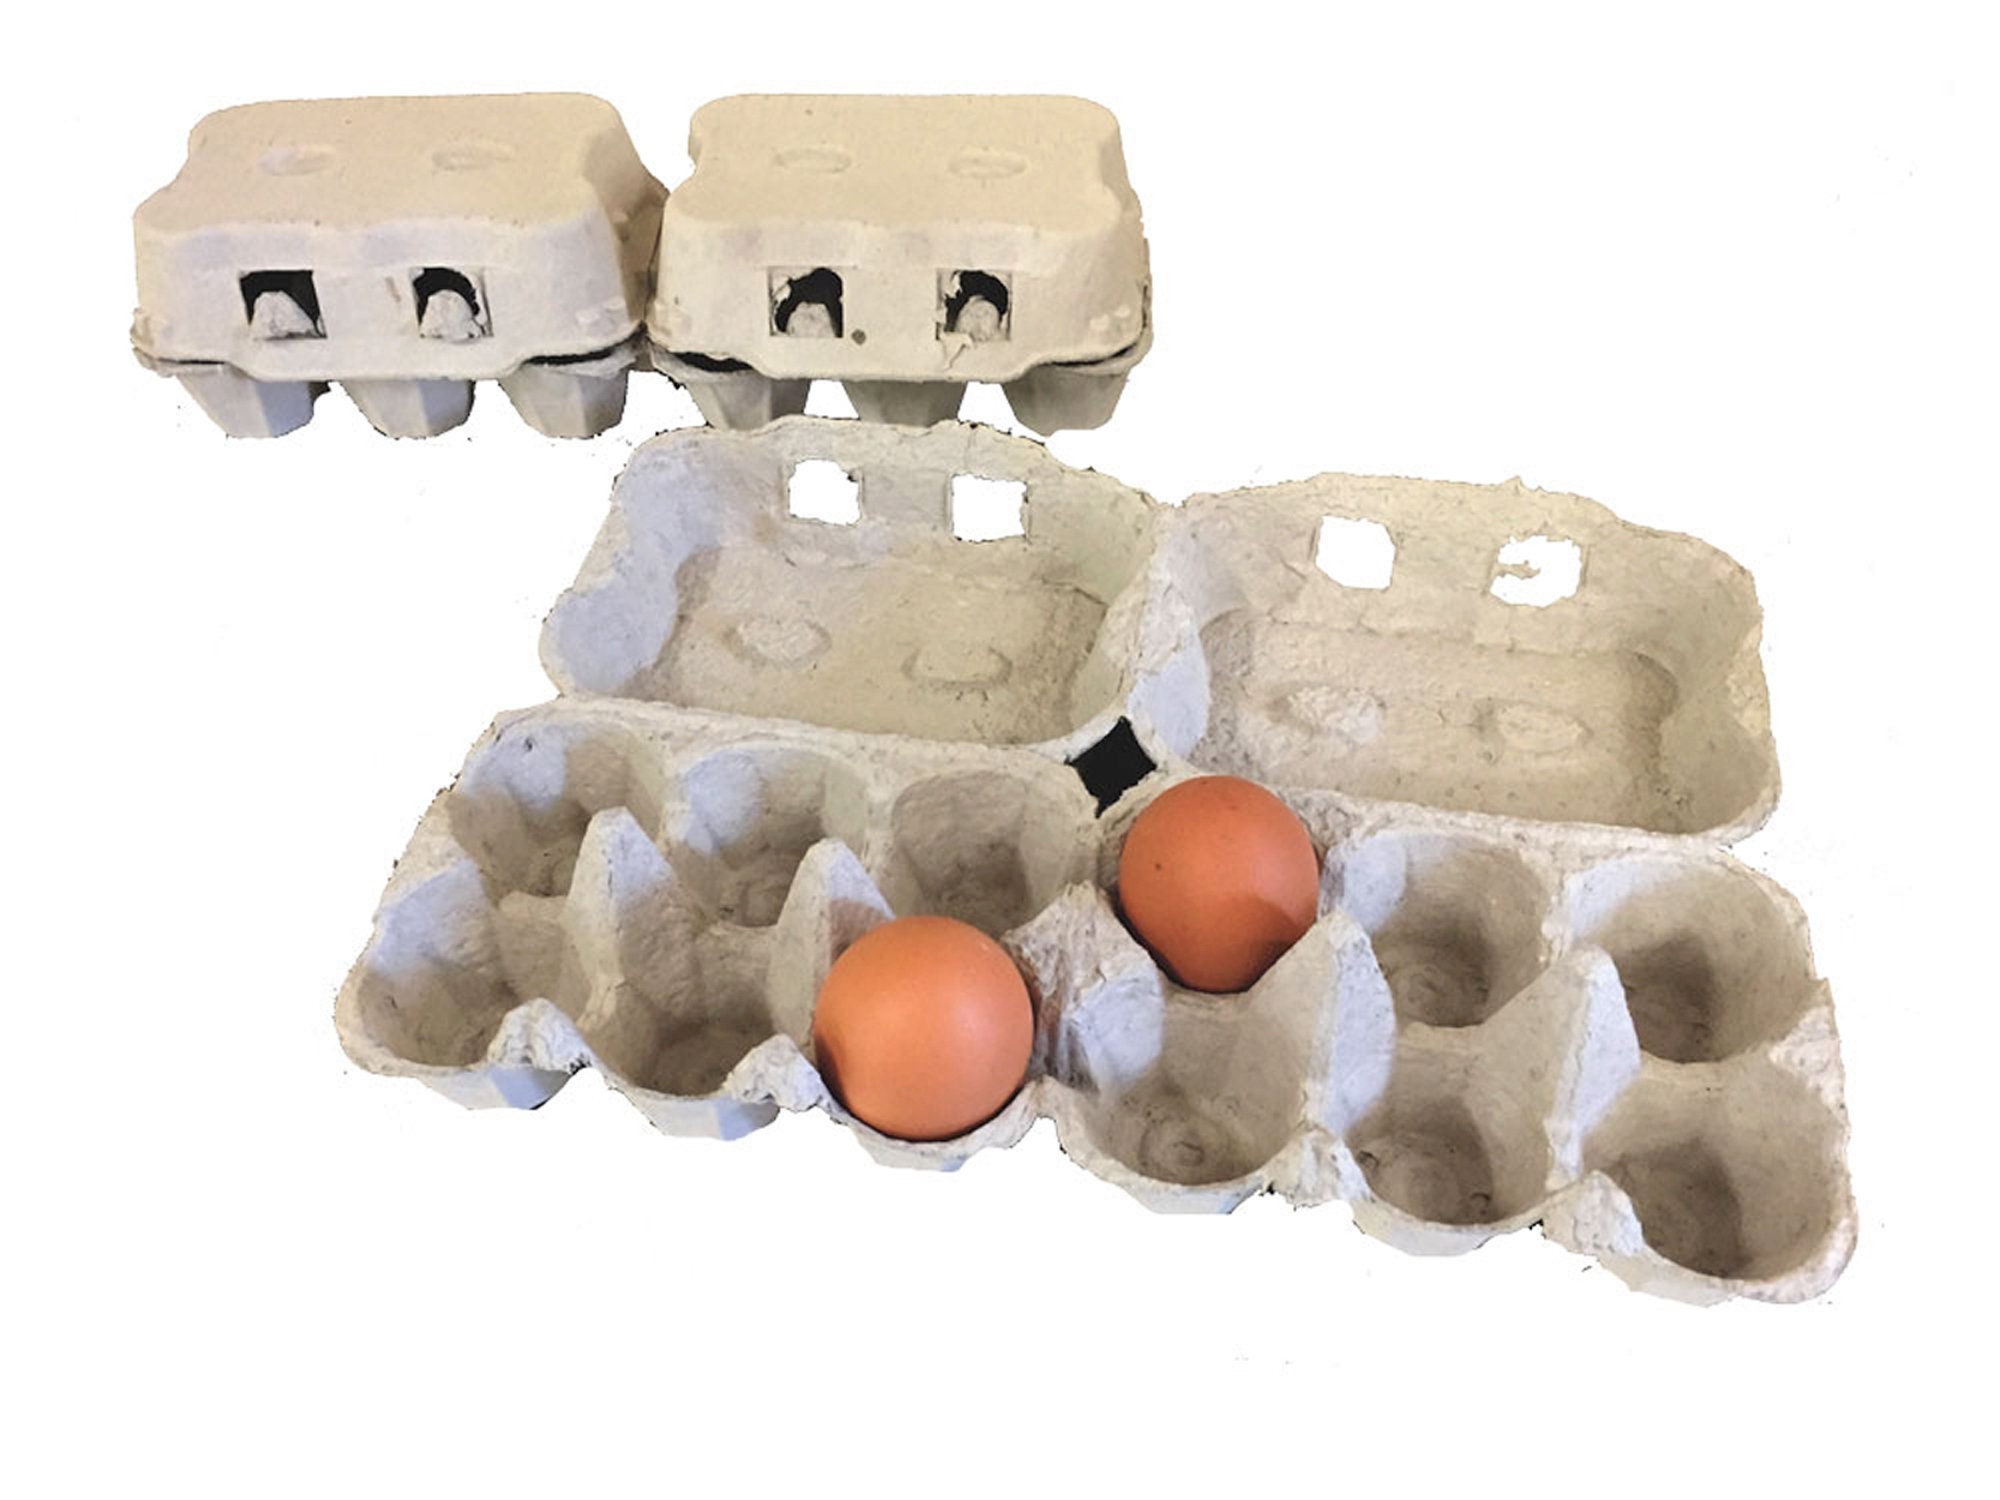 MT Products Blank Natural Pulp Egg Cartons Bulk Holds Up to Twelve Eggs - 1  Dozen - Strong Sturdy Egg Crate Cardboard Material Perfect For Storing